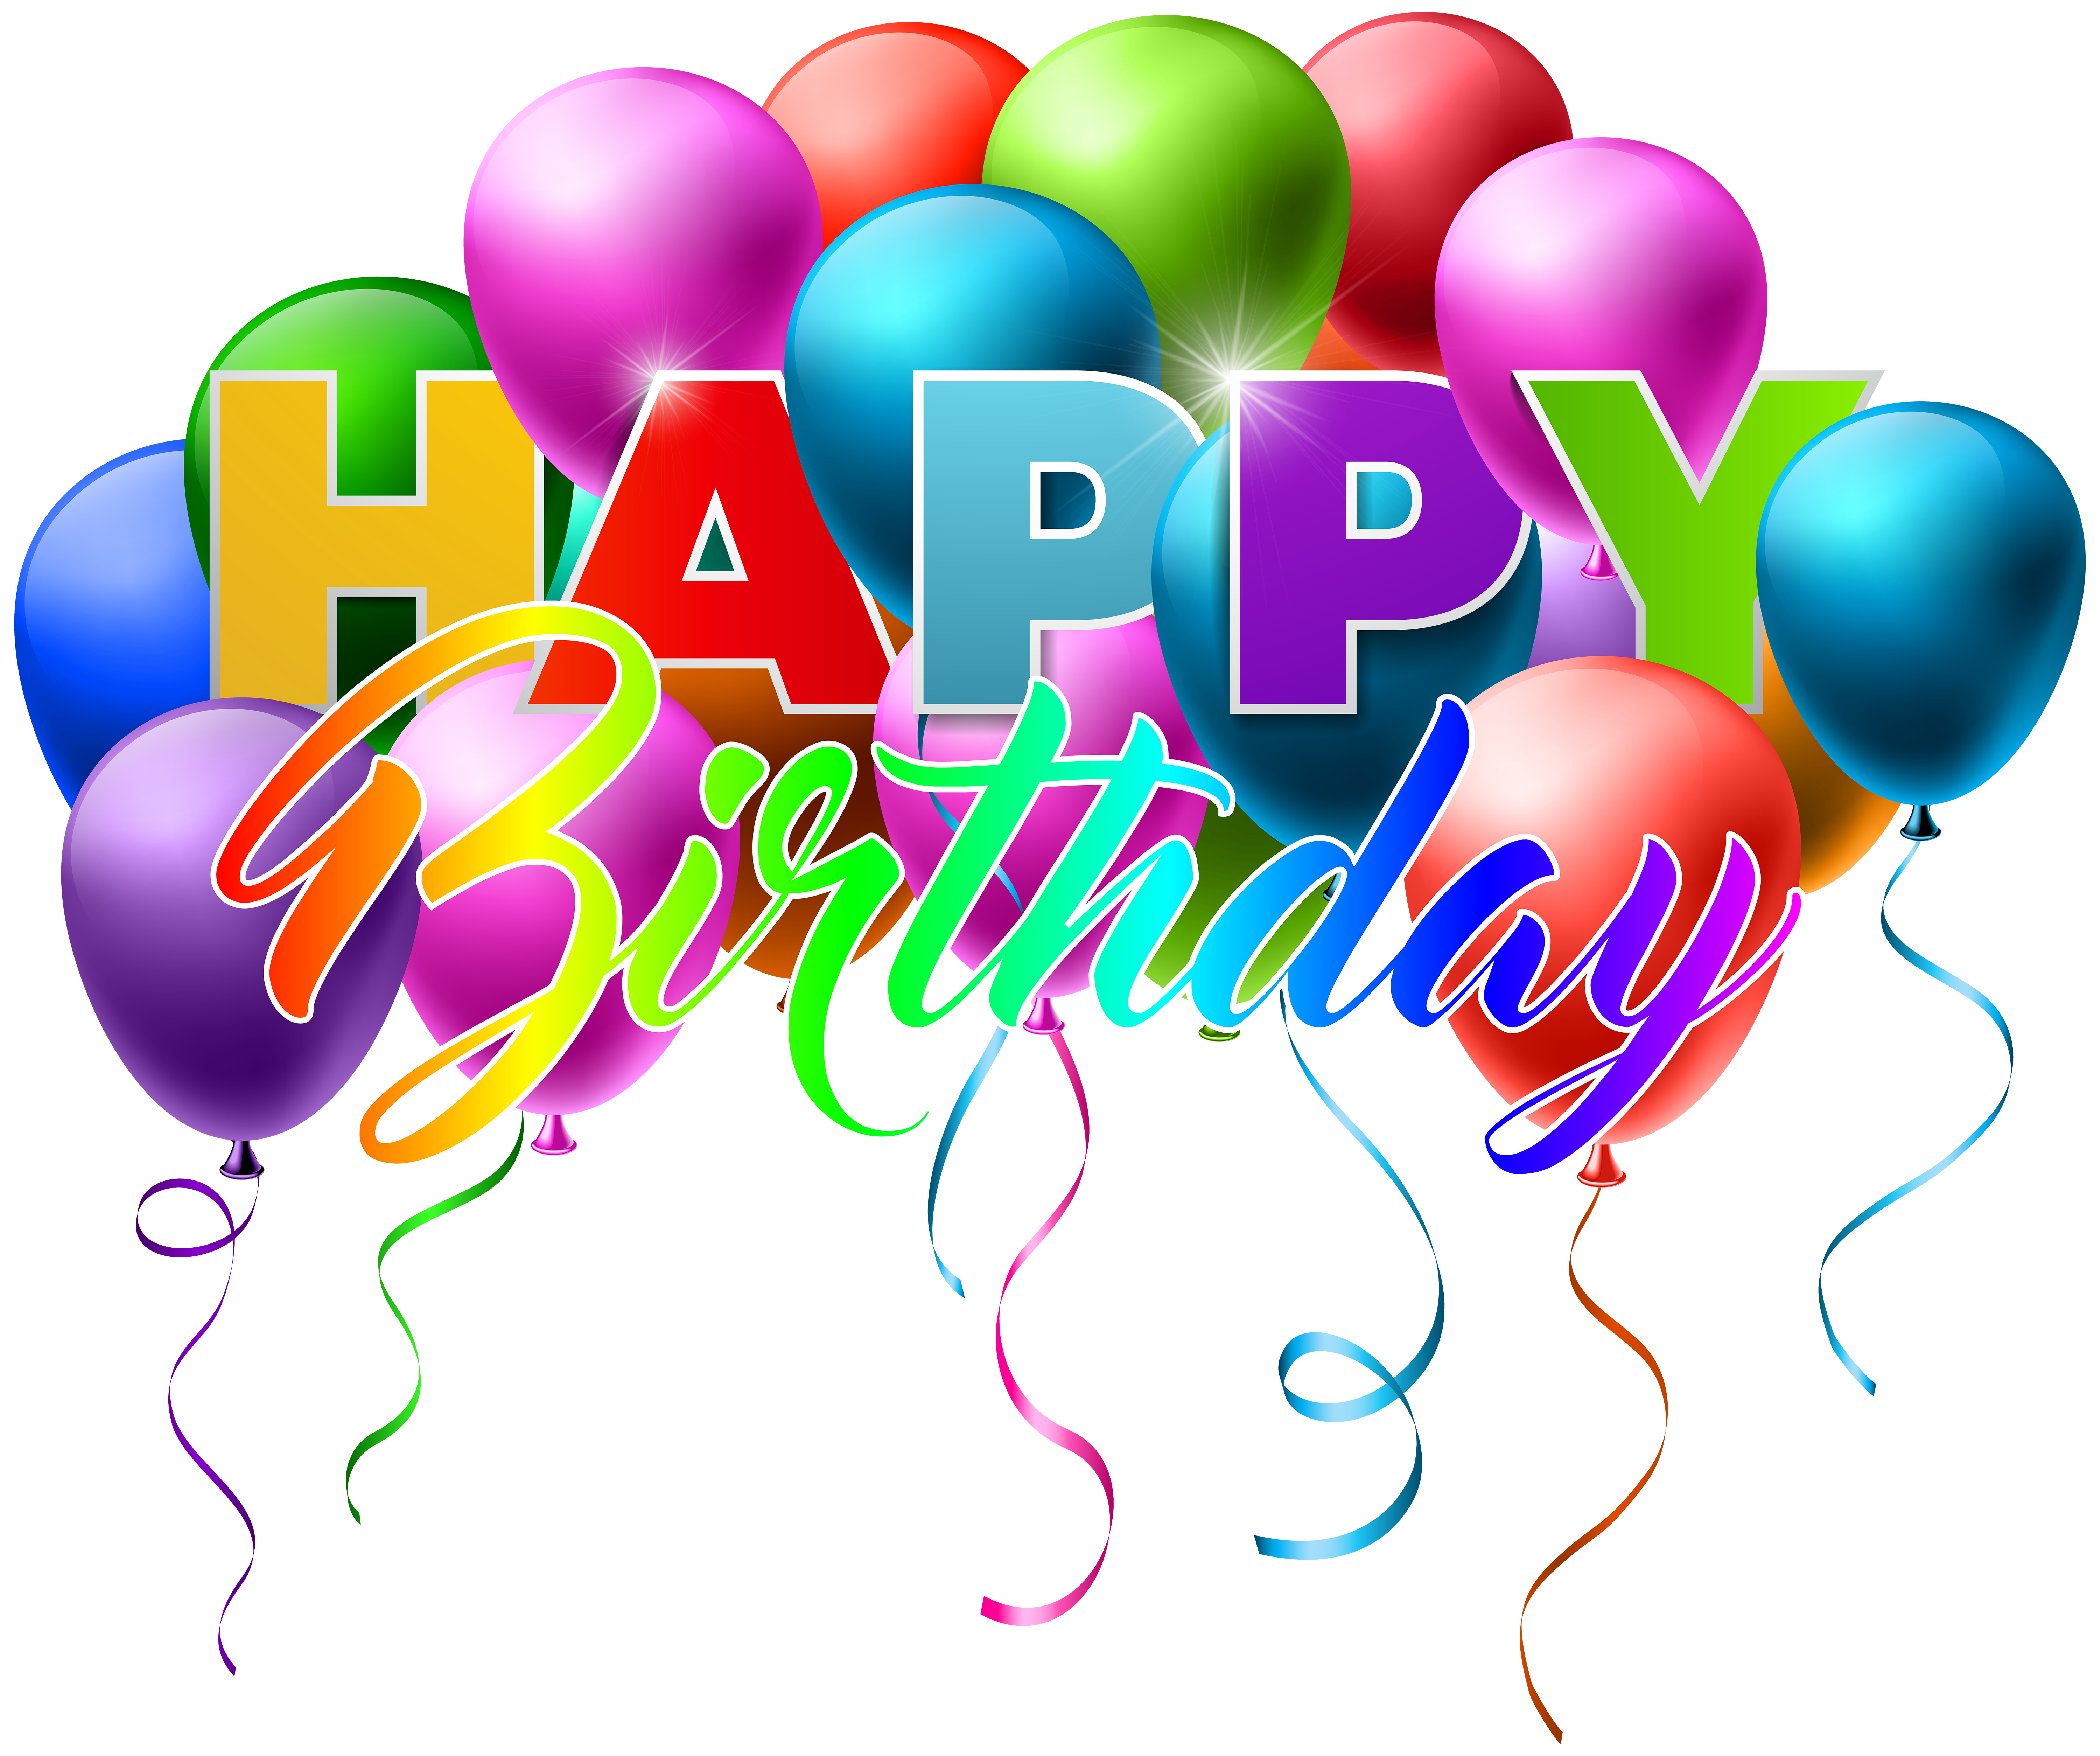 Happy Birthday Png Transparent Clip Art Image Gallery Yopriceville High Quality Images And Transparent Png Free Clipart